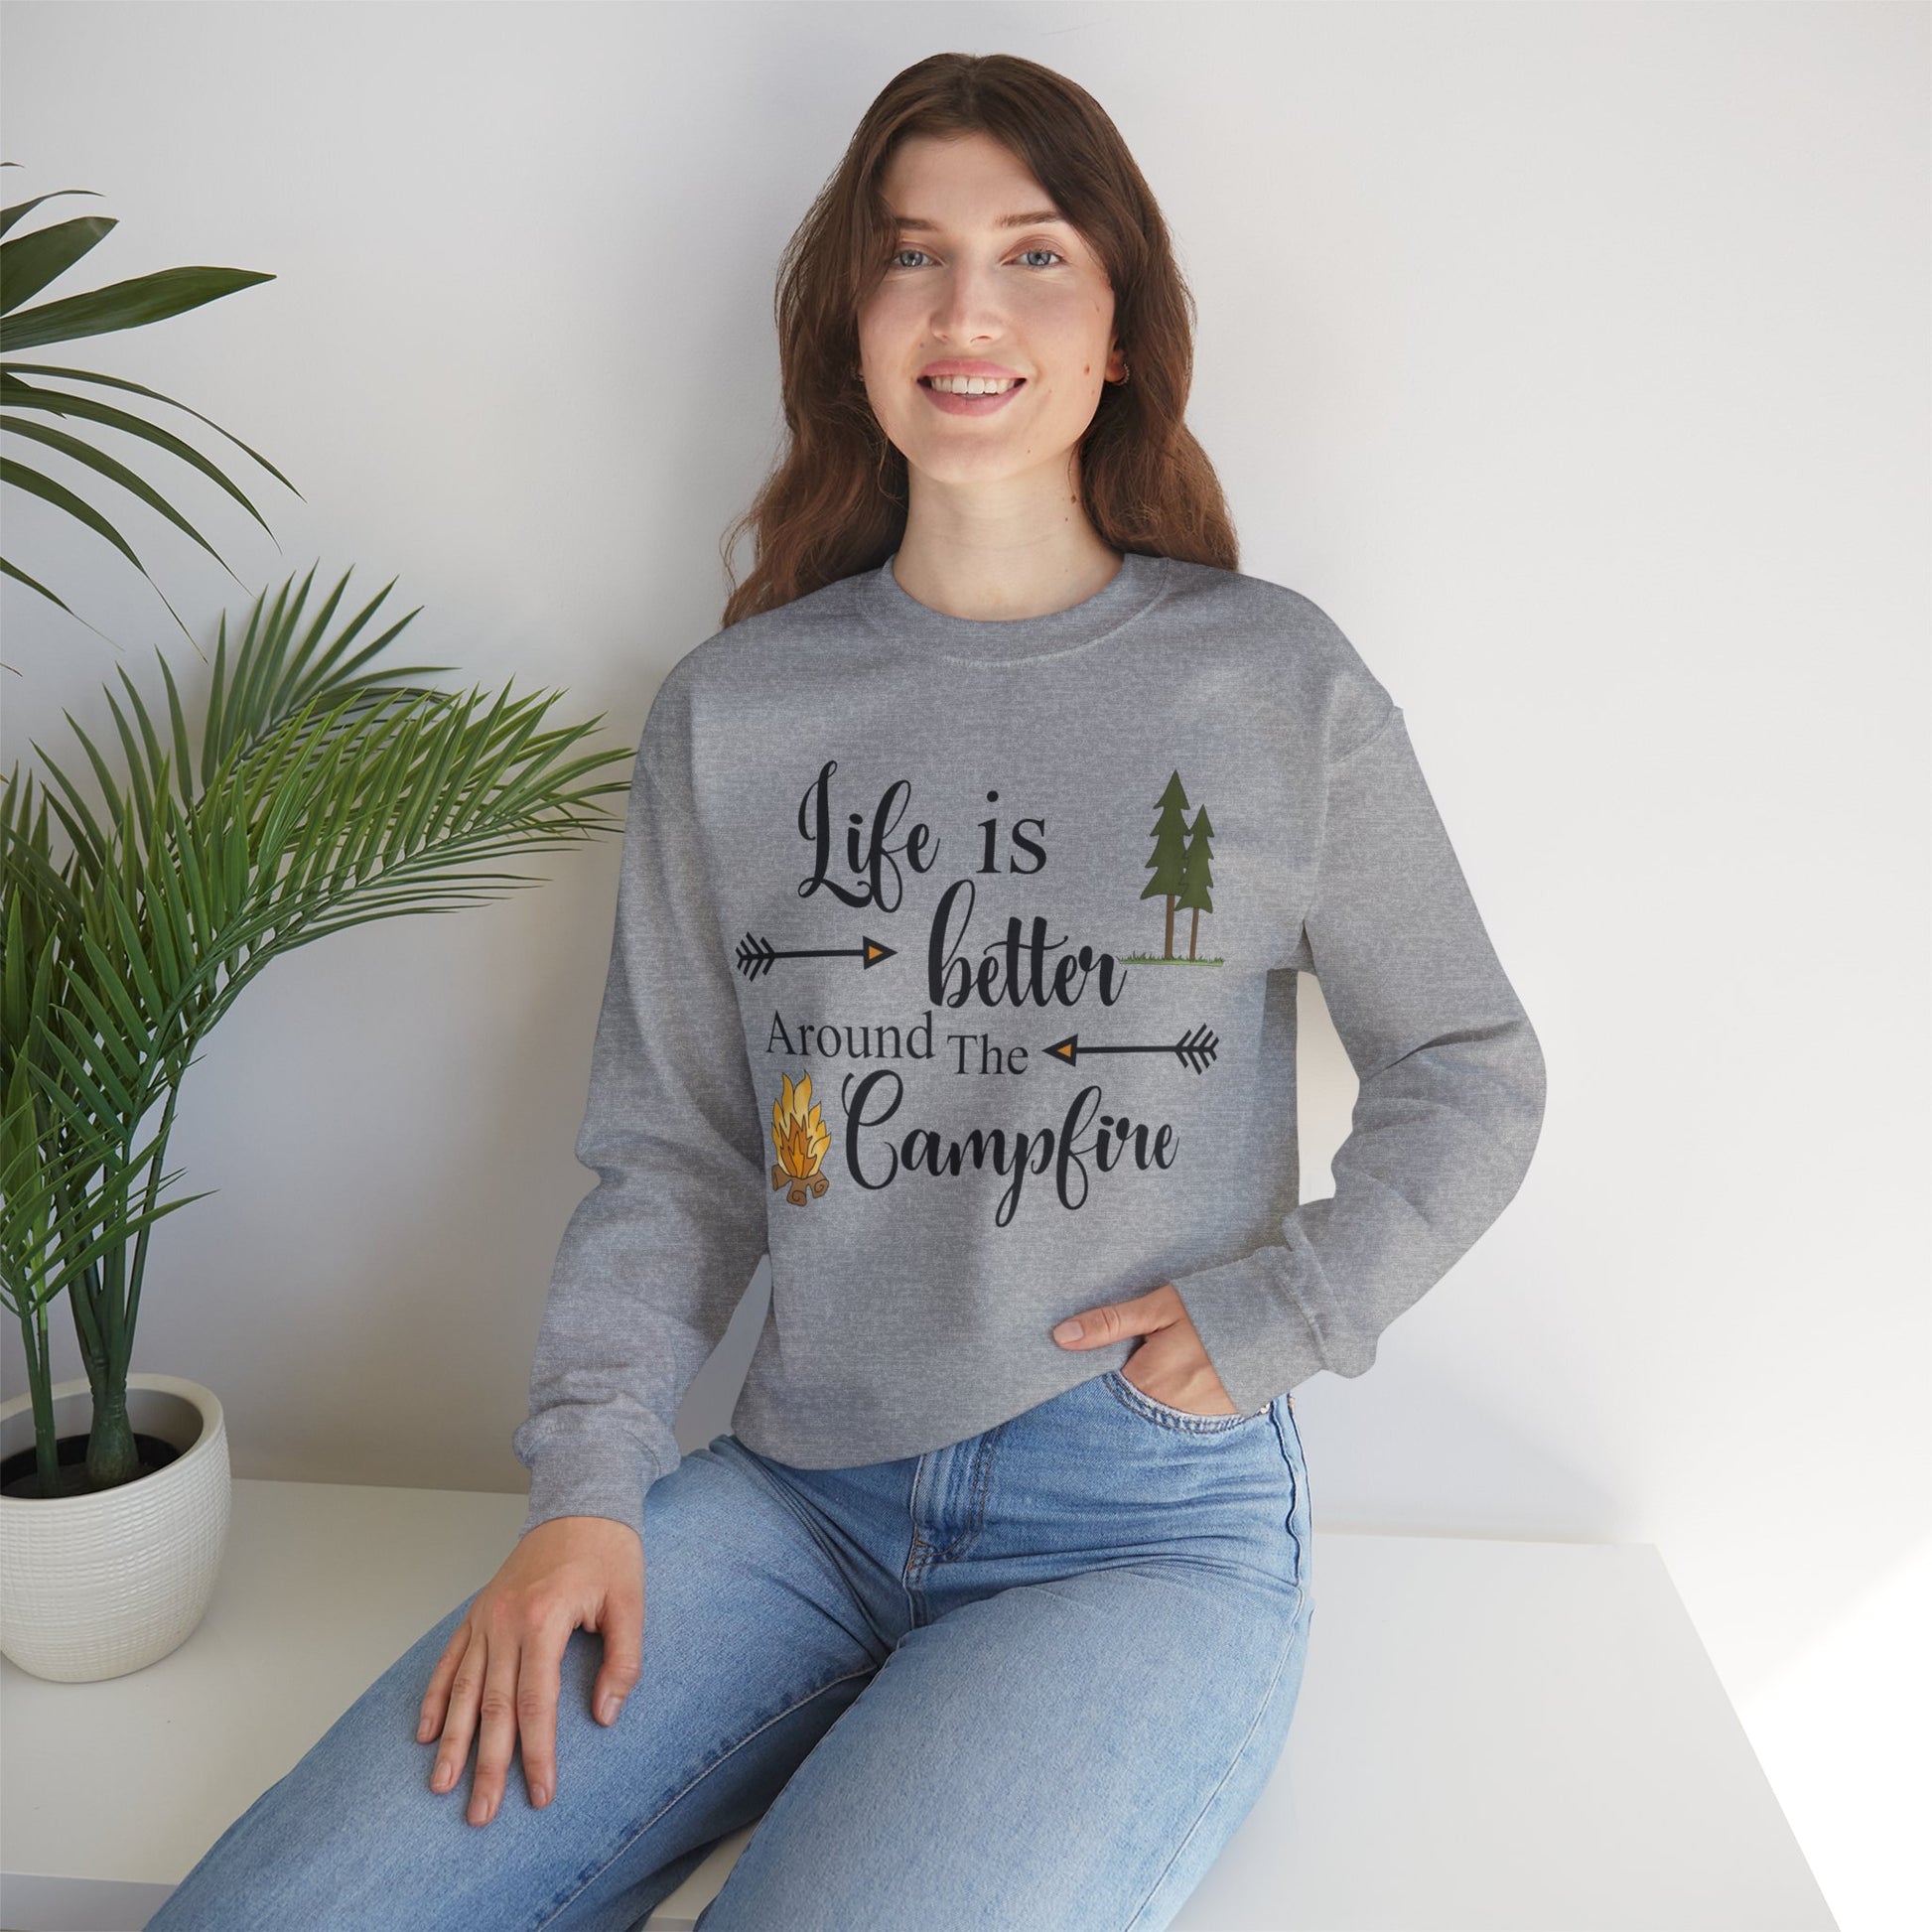 Experience the comforting warmth and camaraderie of a cozy campfire with our Life is Better Around the Campfire sweatshirt. Made with heavy blend fabric, it's perfect for cool evenings spent in the great outdoors. Get yours now and make every camping trip even more memorable!